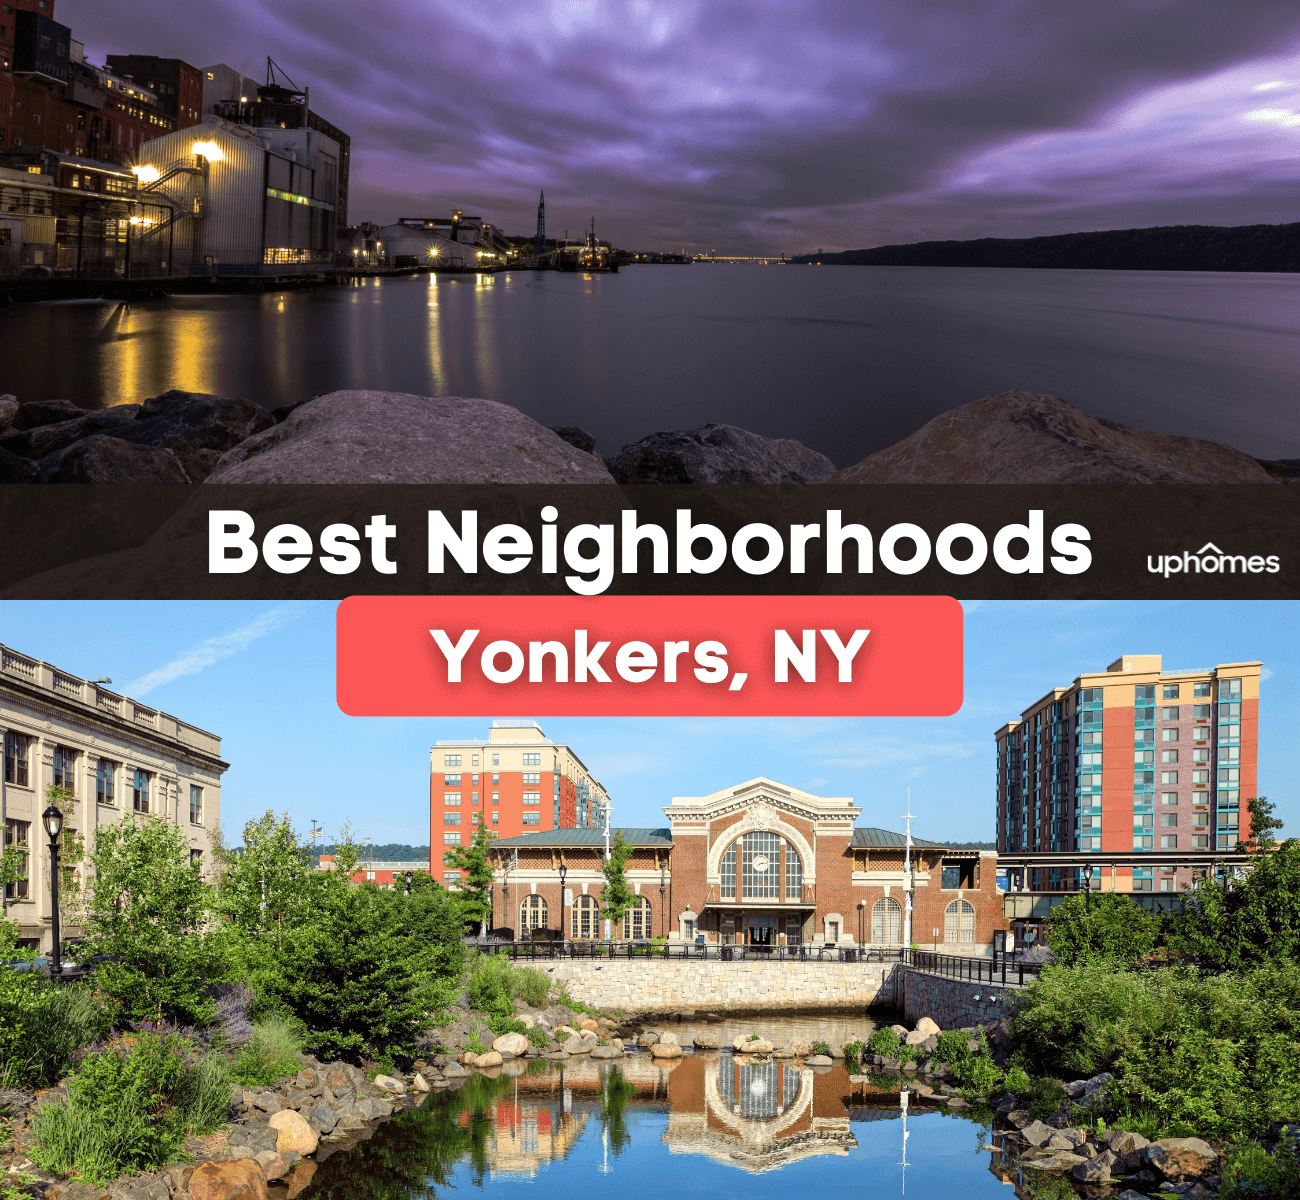 Best Neighborhoods in Yonkers, NY - What are the best places to live in Yonkers